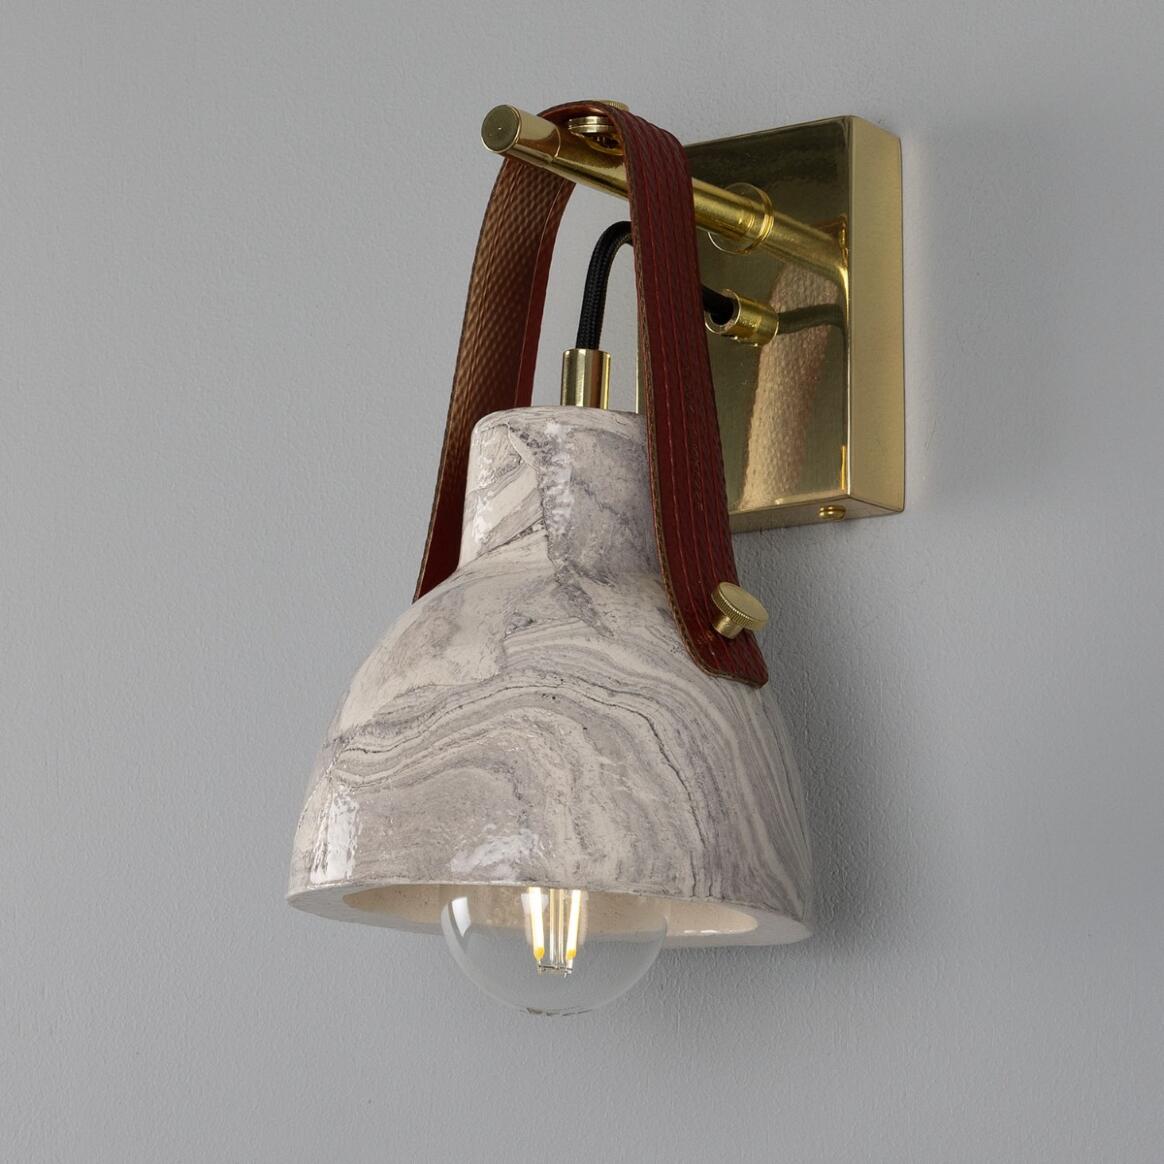 Nagi Marbled Ceramic Wall Light with Rescued Fire-Hose Strap main product image